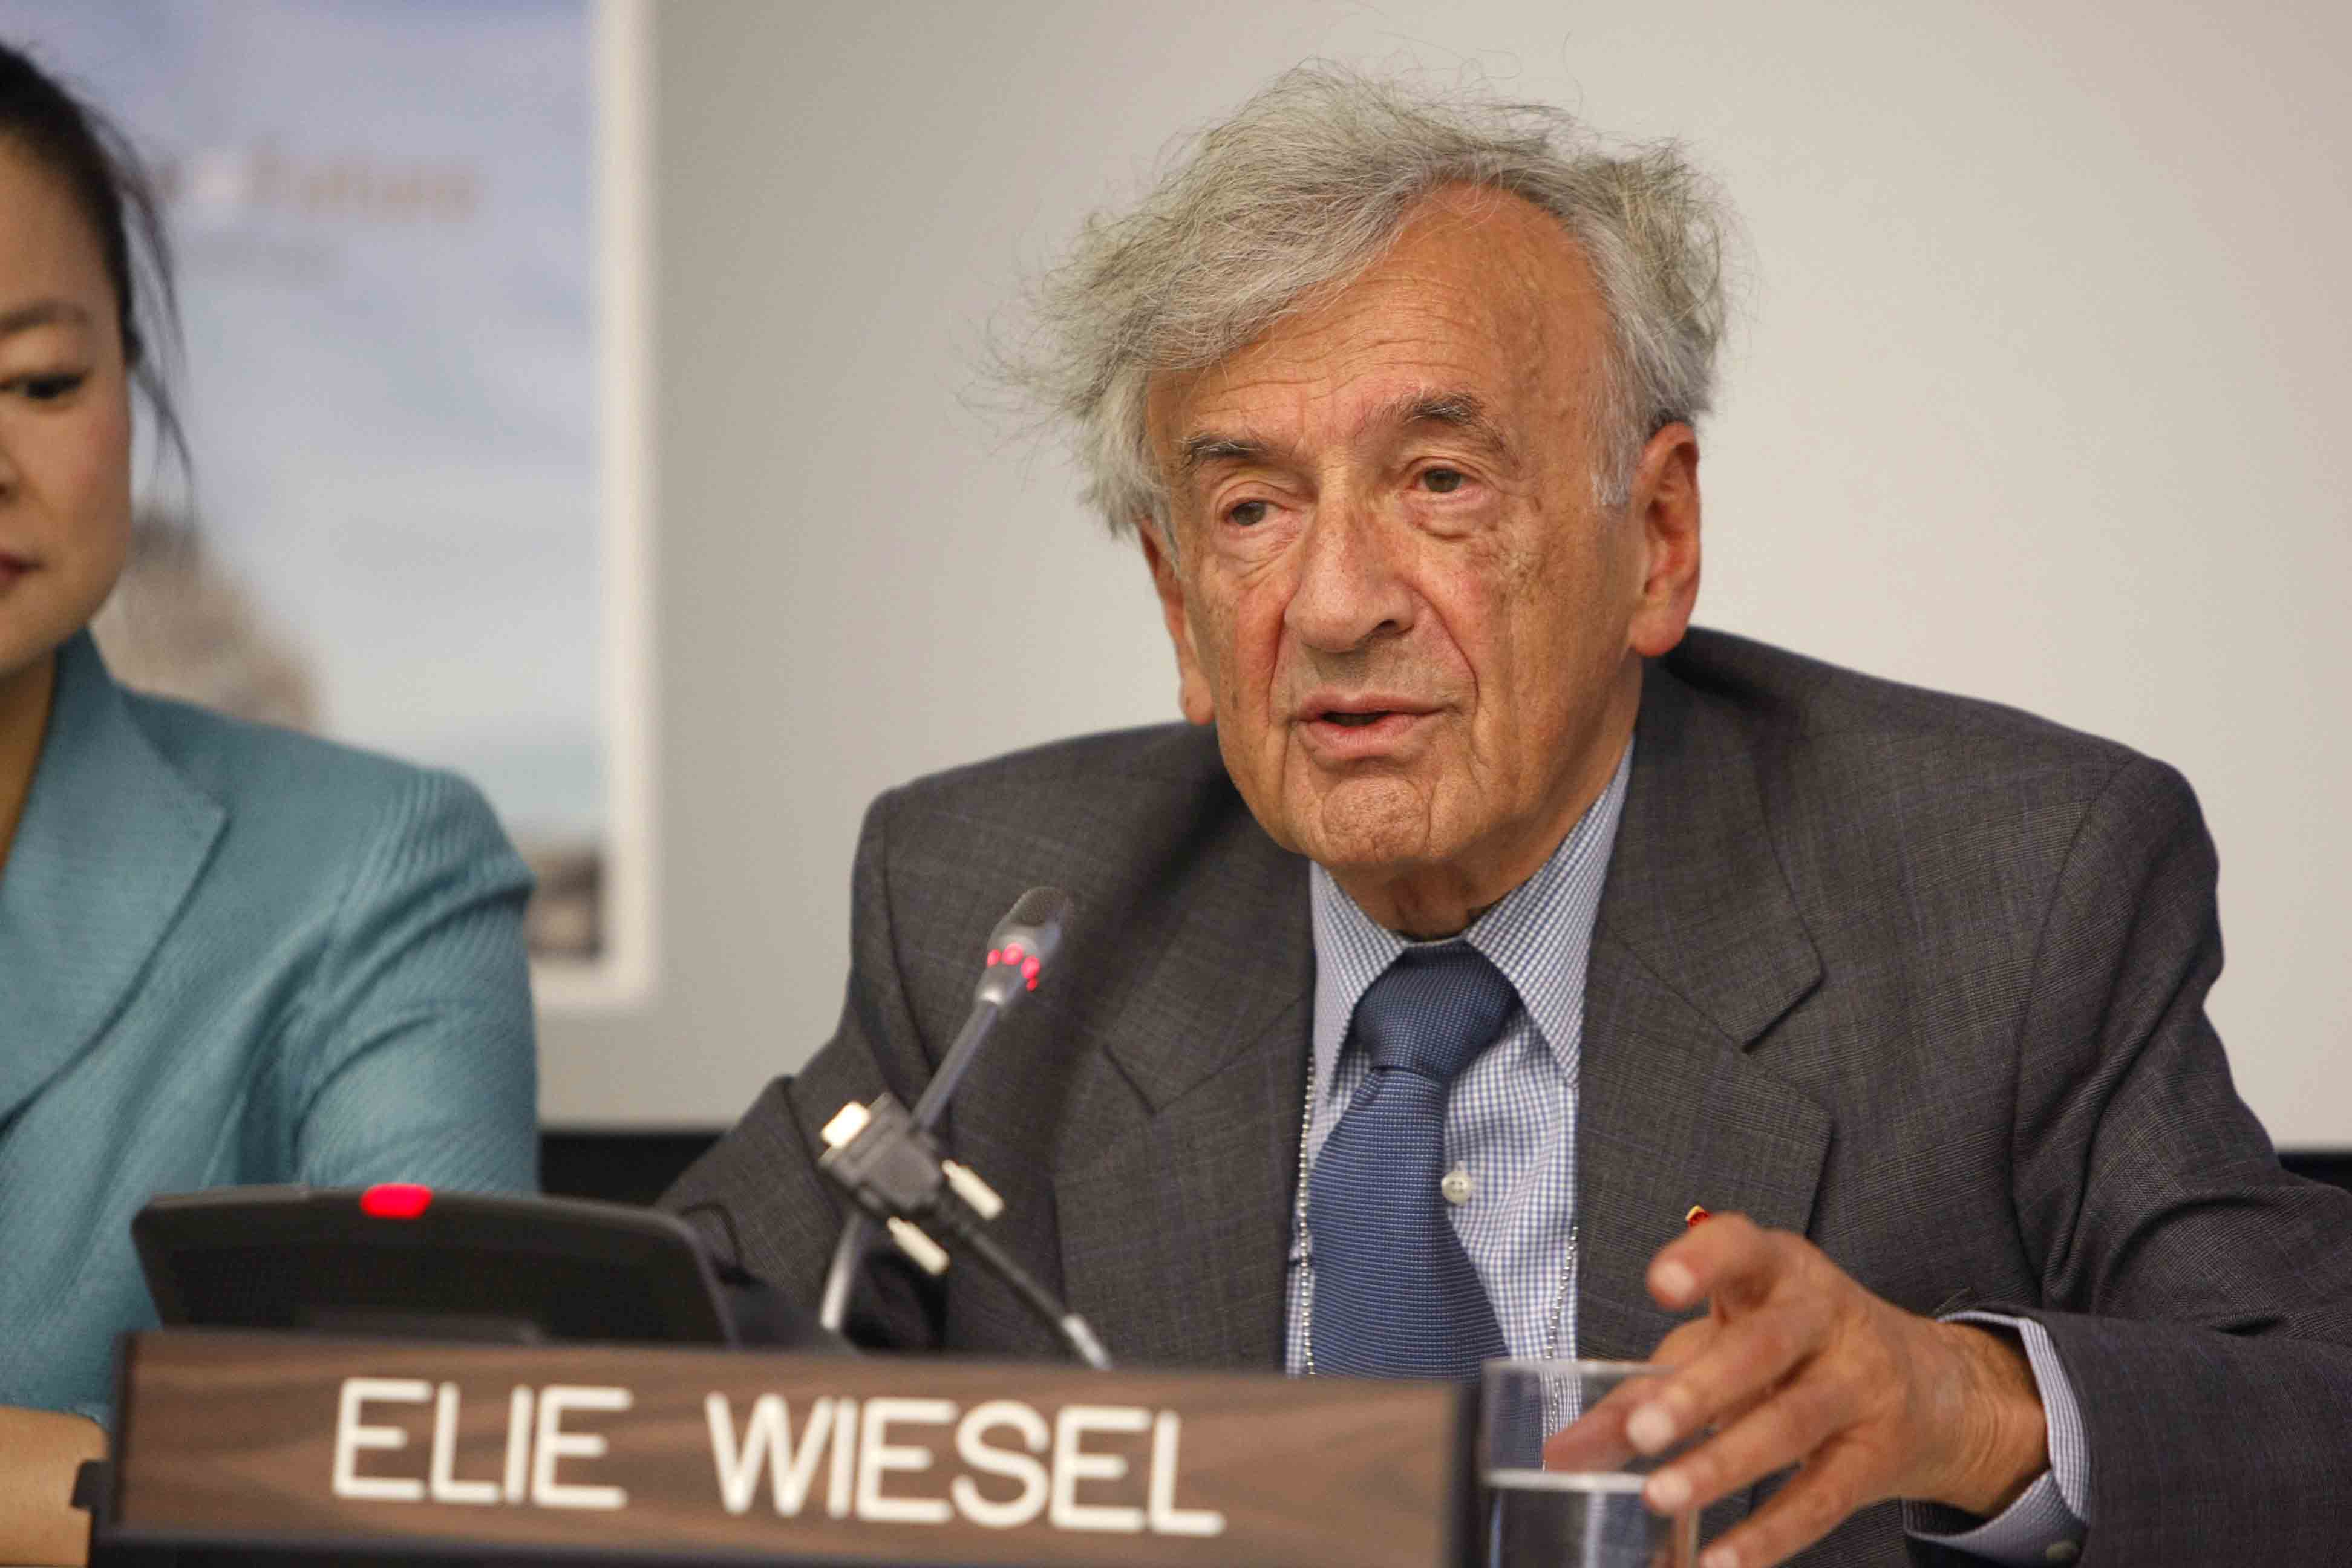 Elie Wiesel, UN Messenger of Peace and Nobel Laureate, addresses the annual UN Department of Public Information (DPI) Student Youth Conference, on 17 September 2010, at the United Nations Headquarters in New York. UN Photo/Paulo Filgueiras